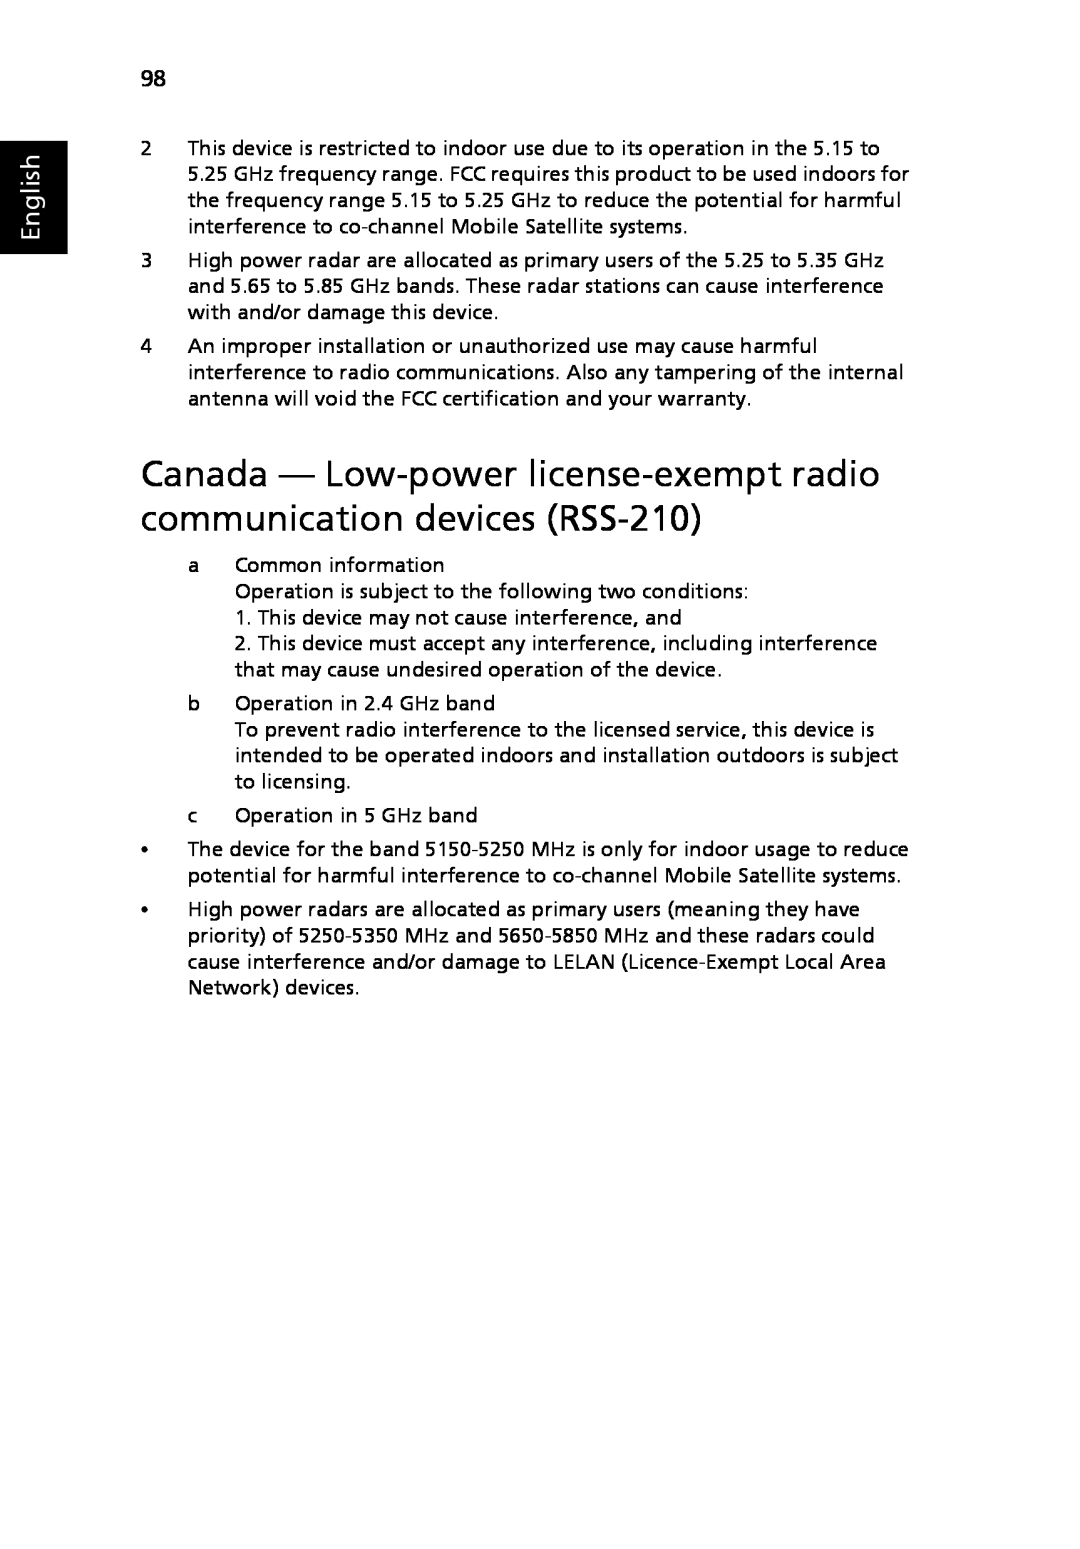 Acer 9120 manual Canada - Low-power license-exempt radio communication devices RSS-210, English 